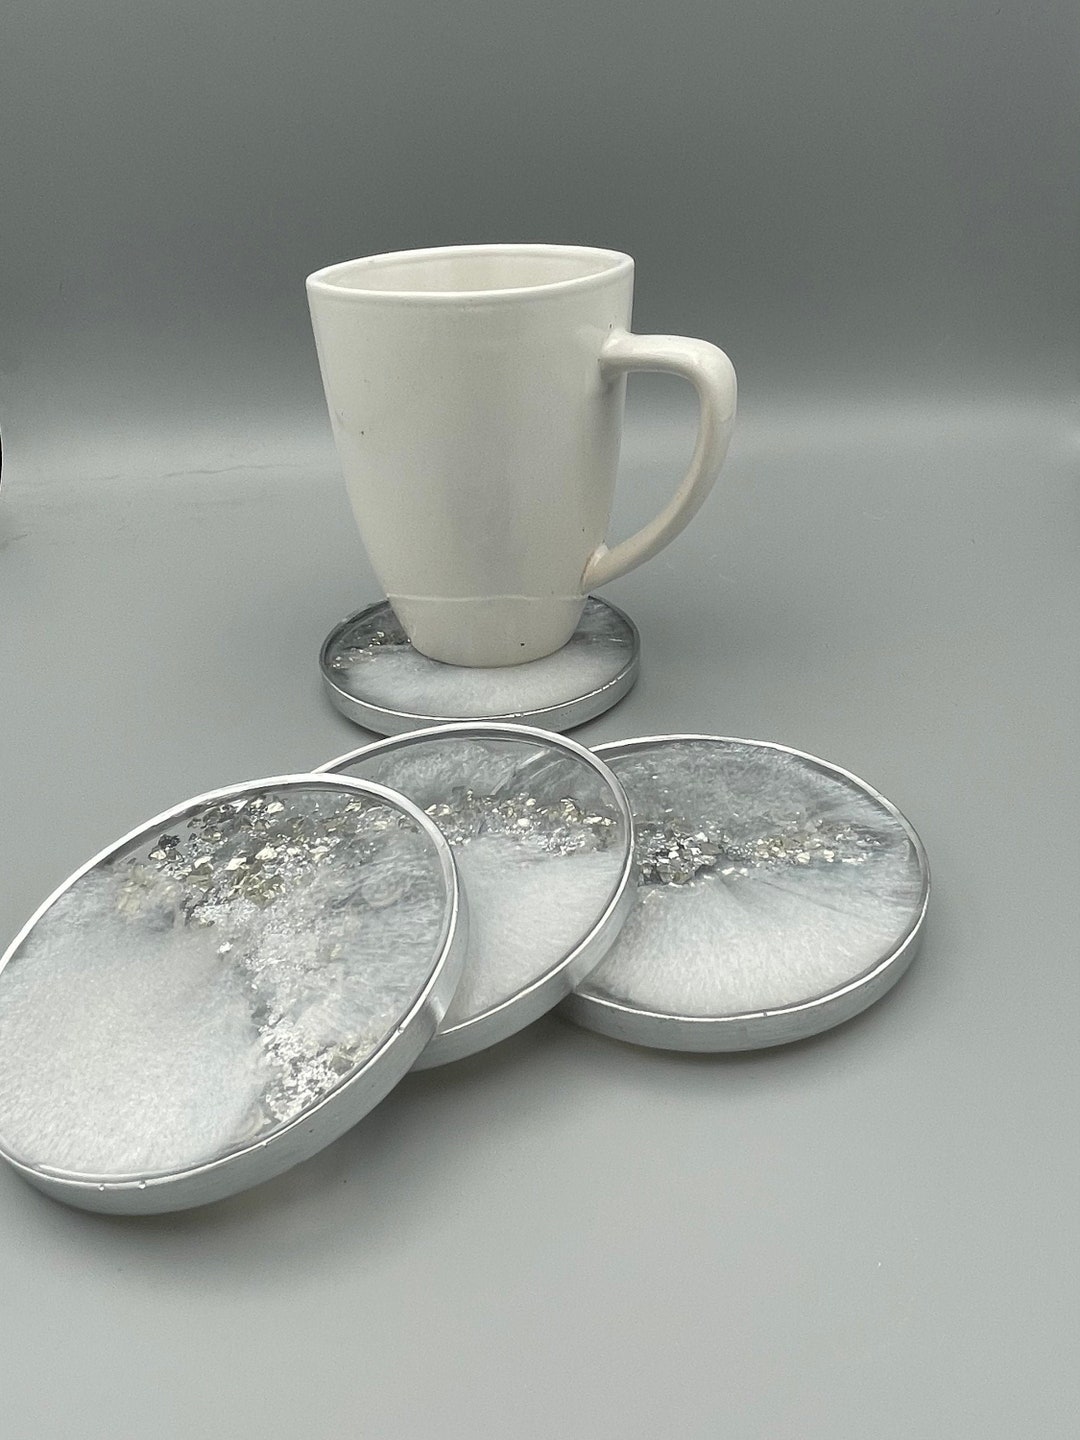 4 Round White and Silver Coaster Sets Made of Resin Silver - Etsy